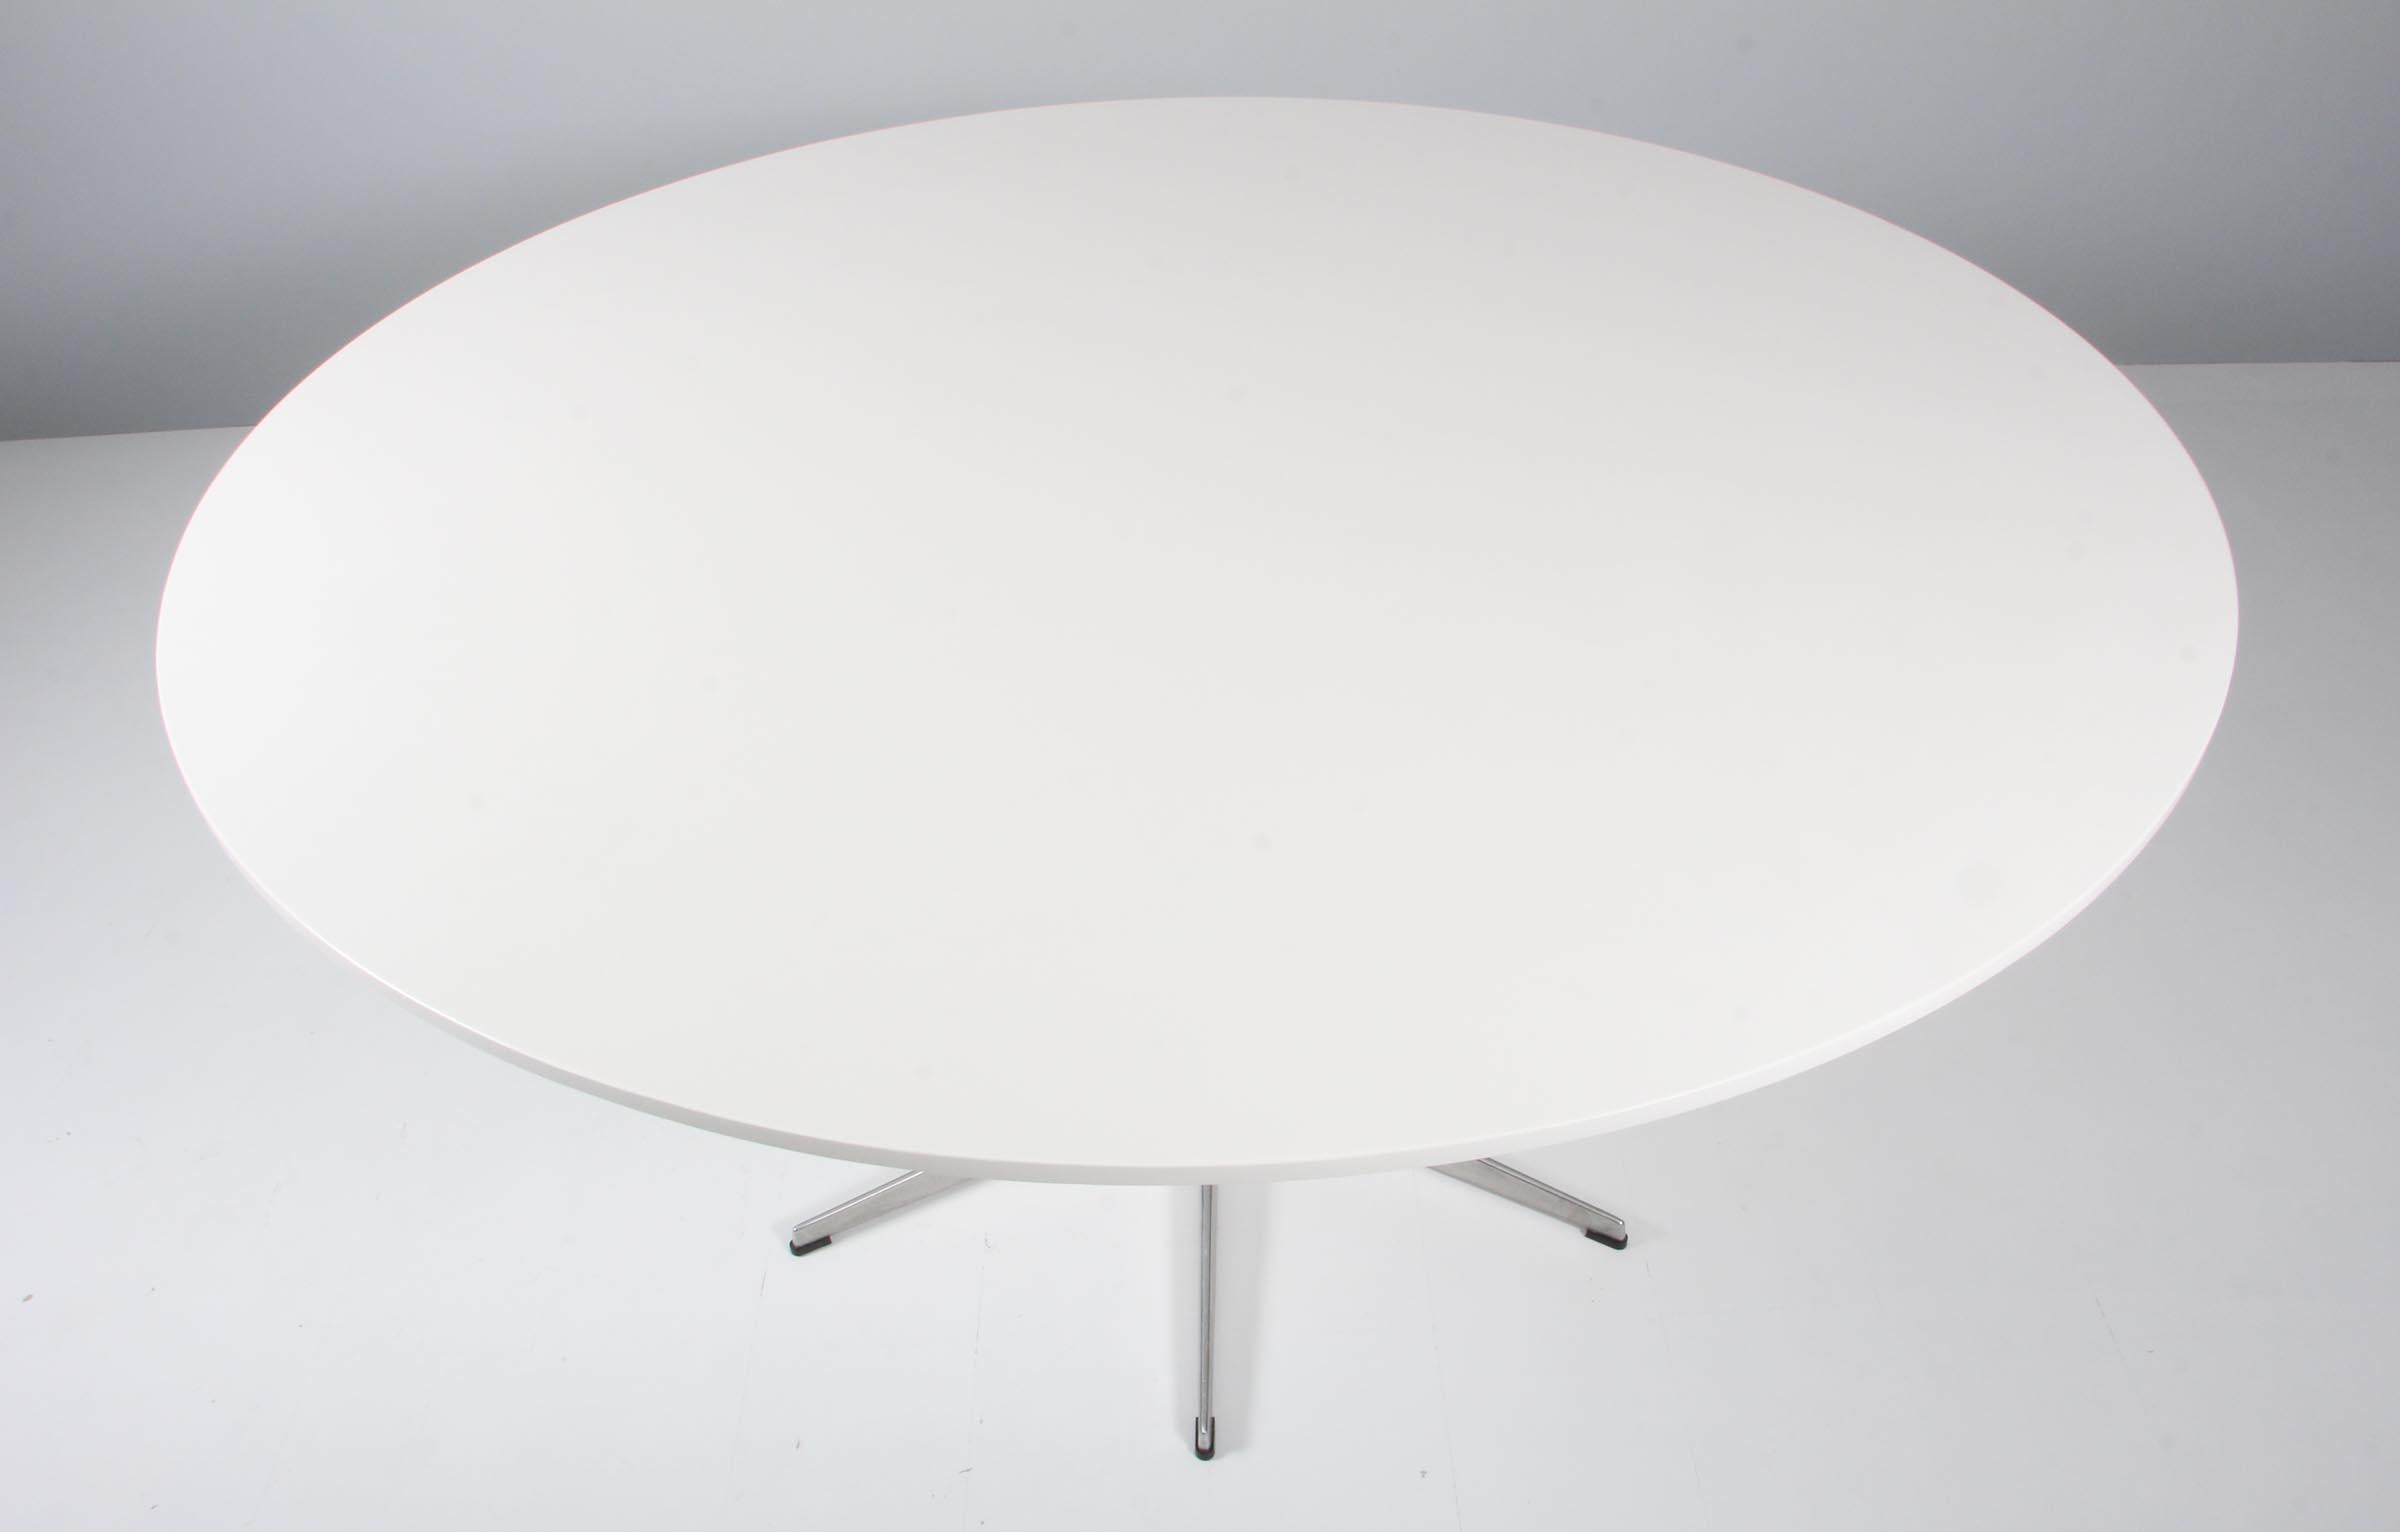 Piet Hein & Arne Jacobsen café table with new laquered white top.

six star base of aluminium and steel.

Made by Fritz Hansen.